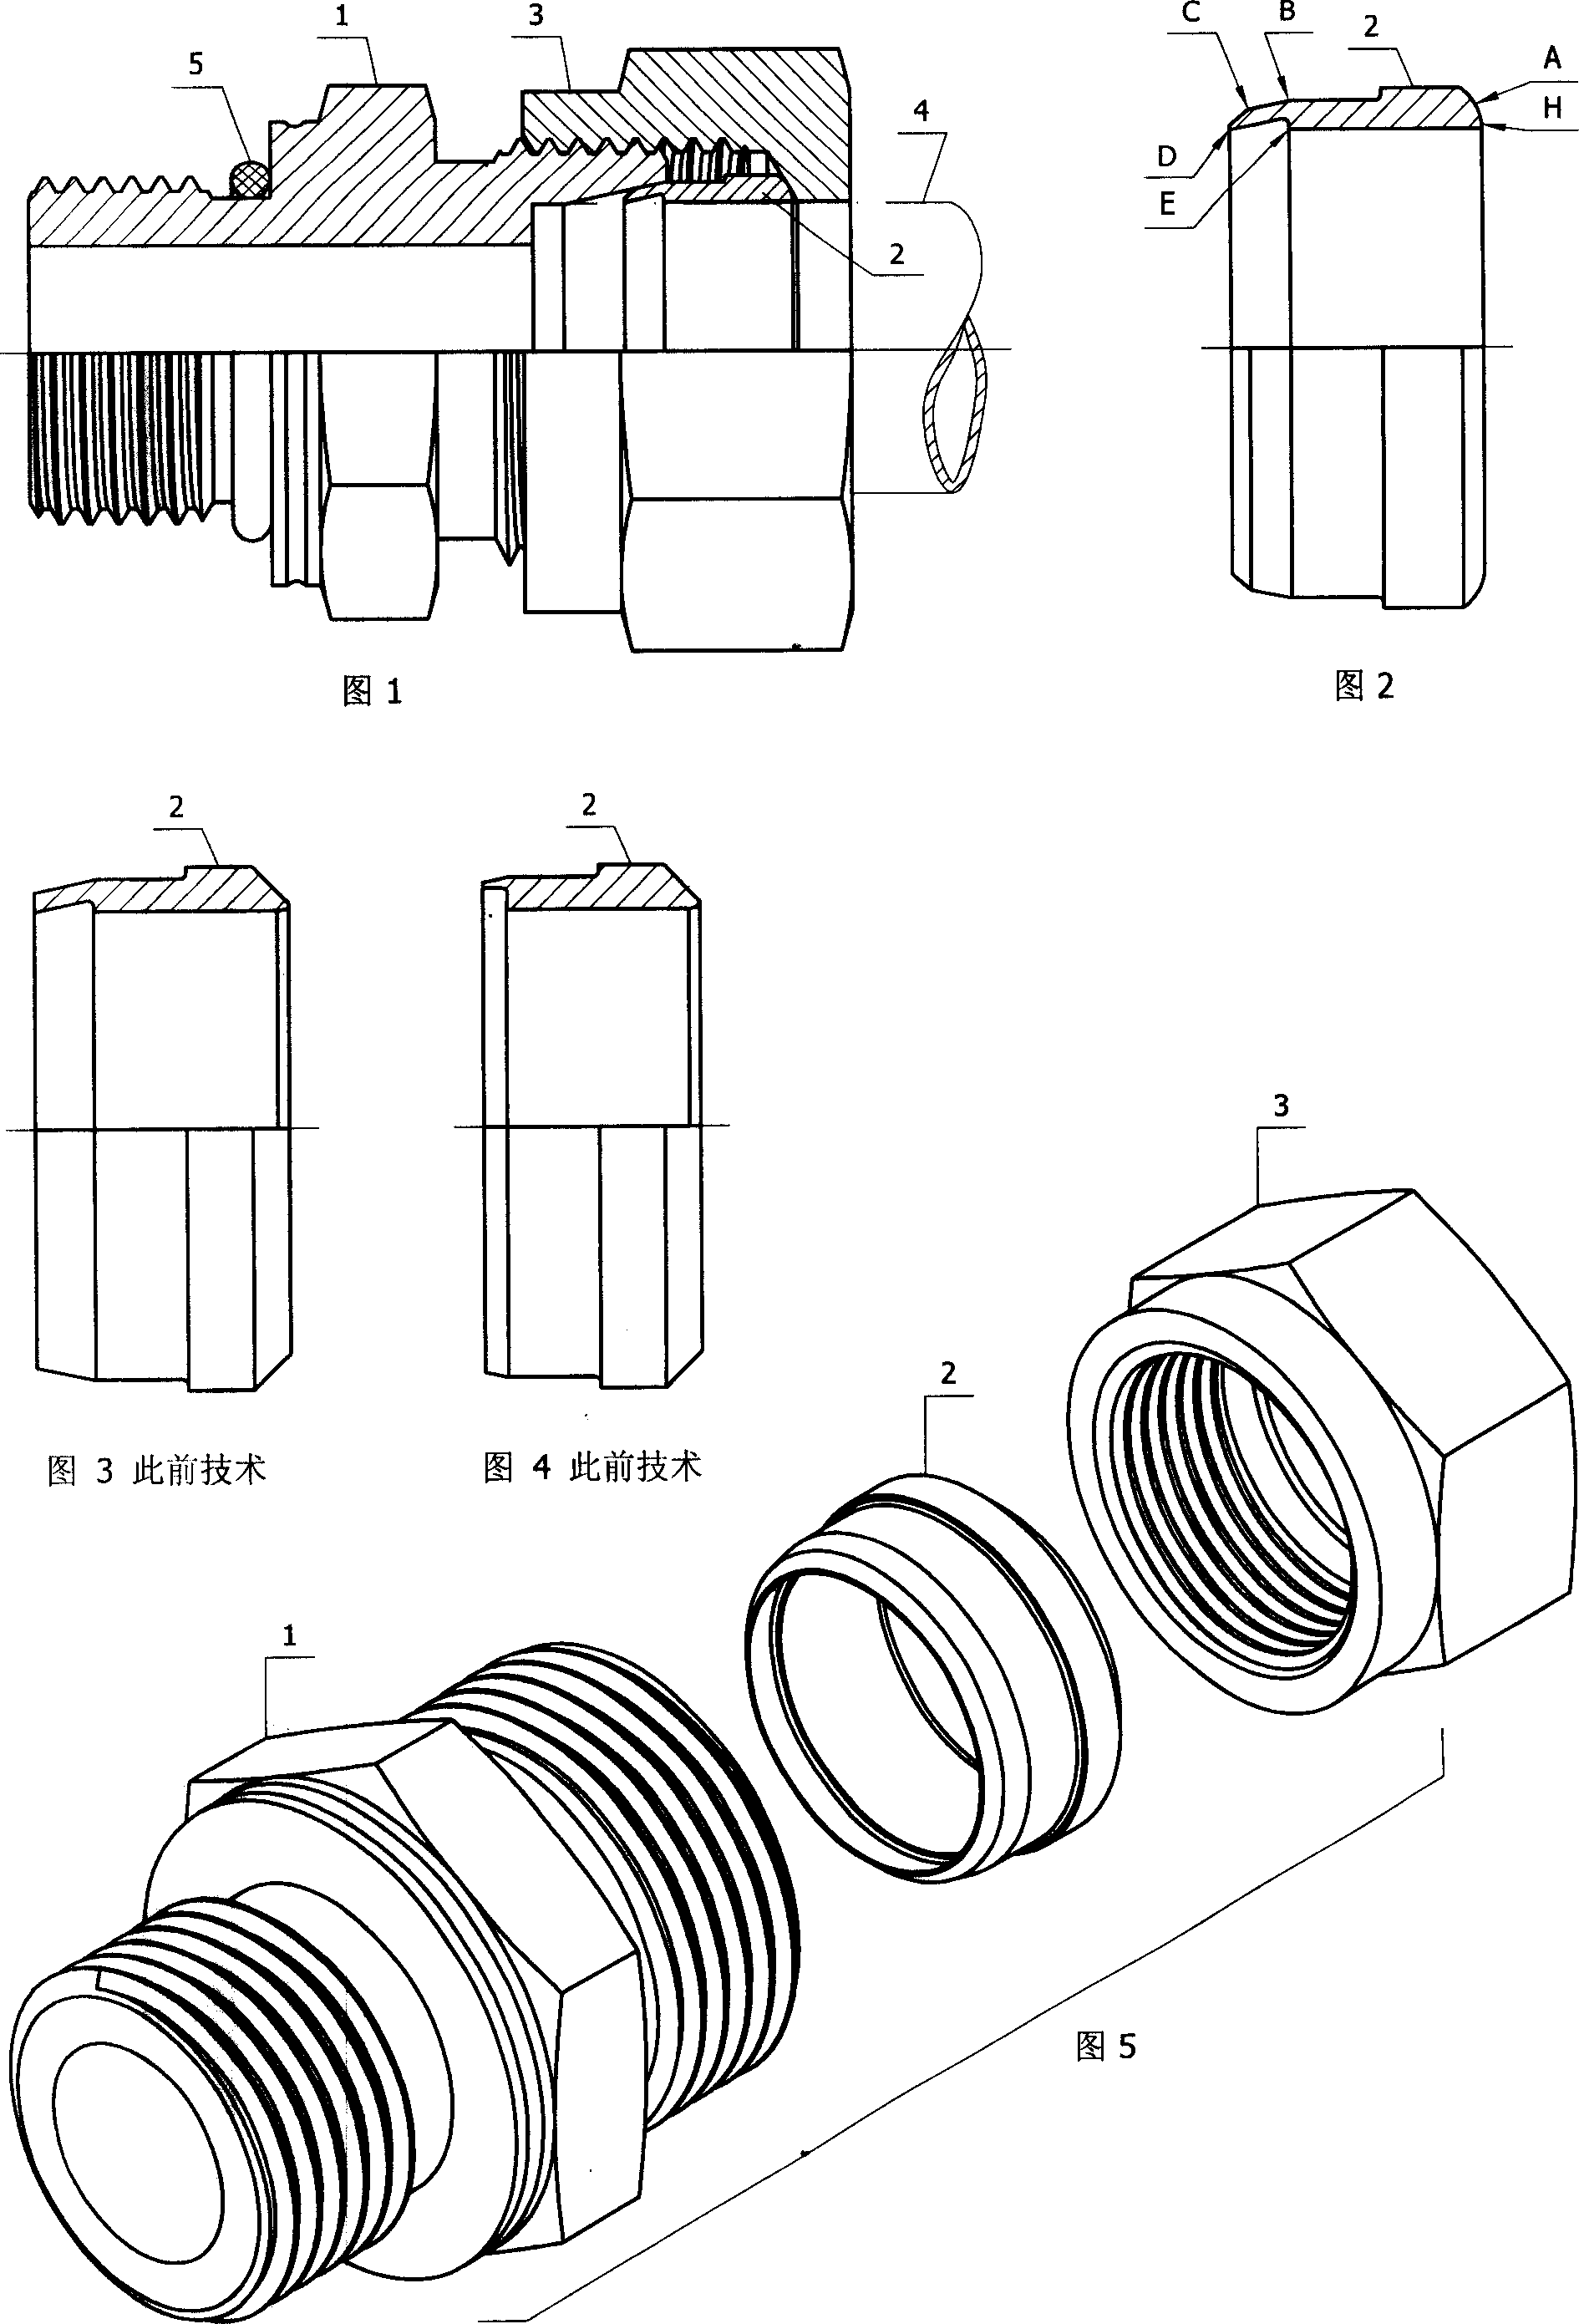 Single and double hoop coenosarc extruded connecting pipe joint